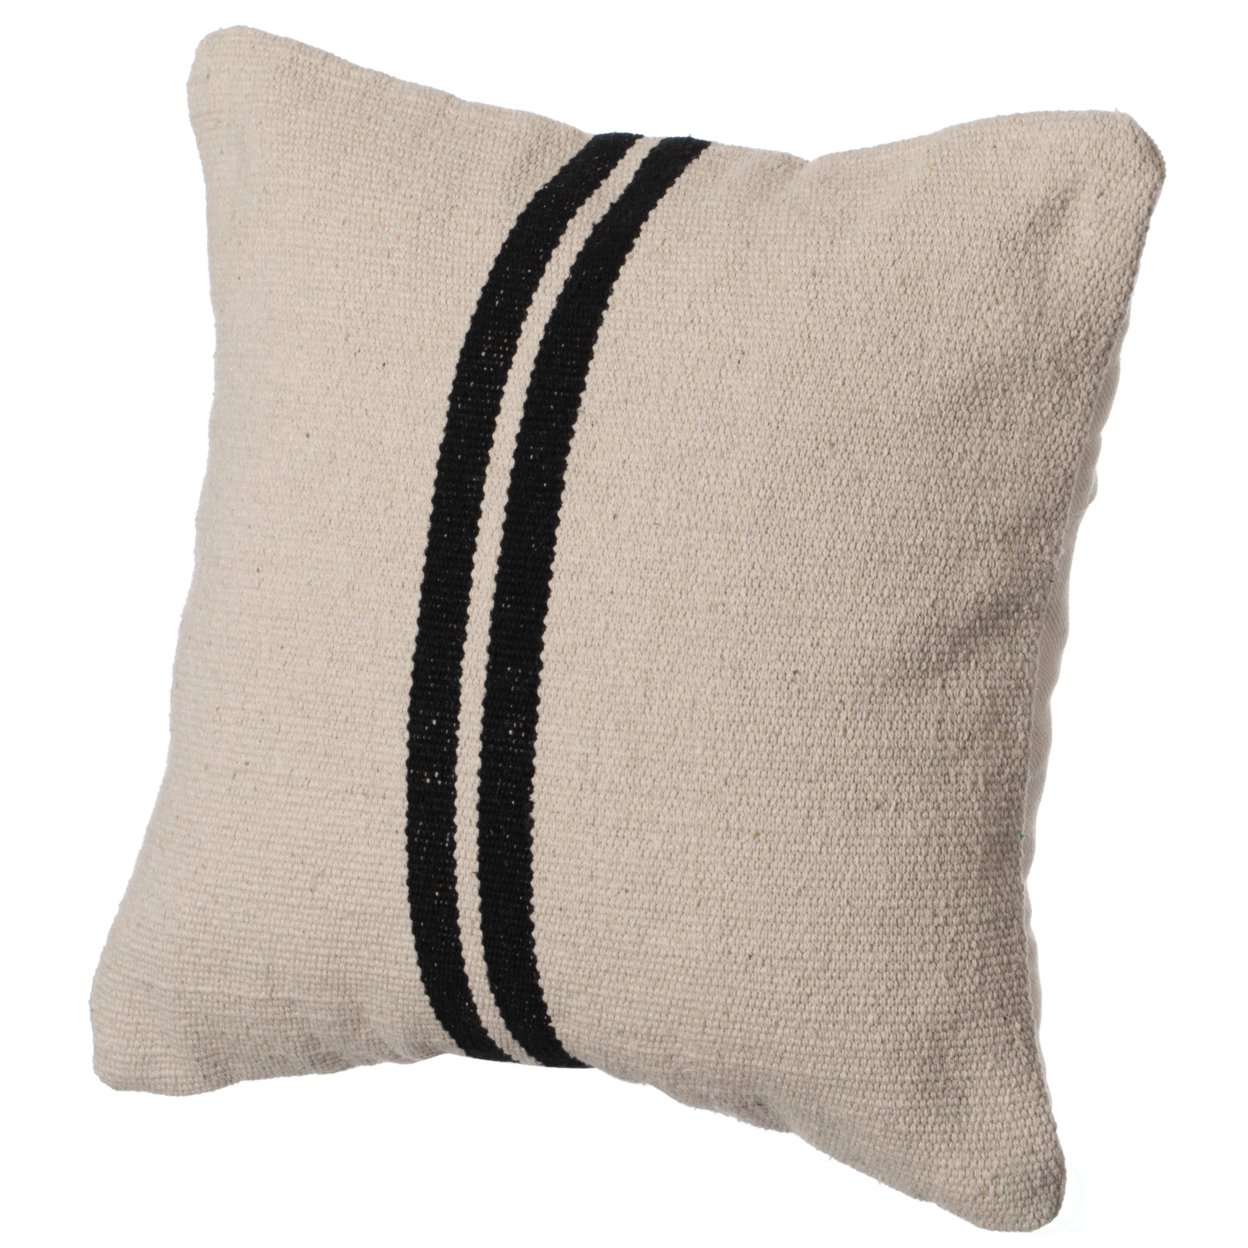 16 Handwoven Cotton Throw Pillow Cover Flat Natural Design - Fringed With Cushion